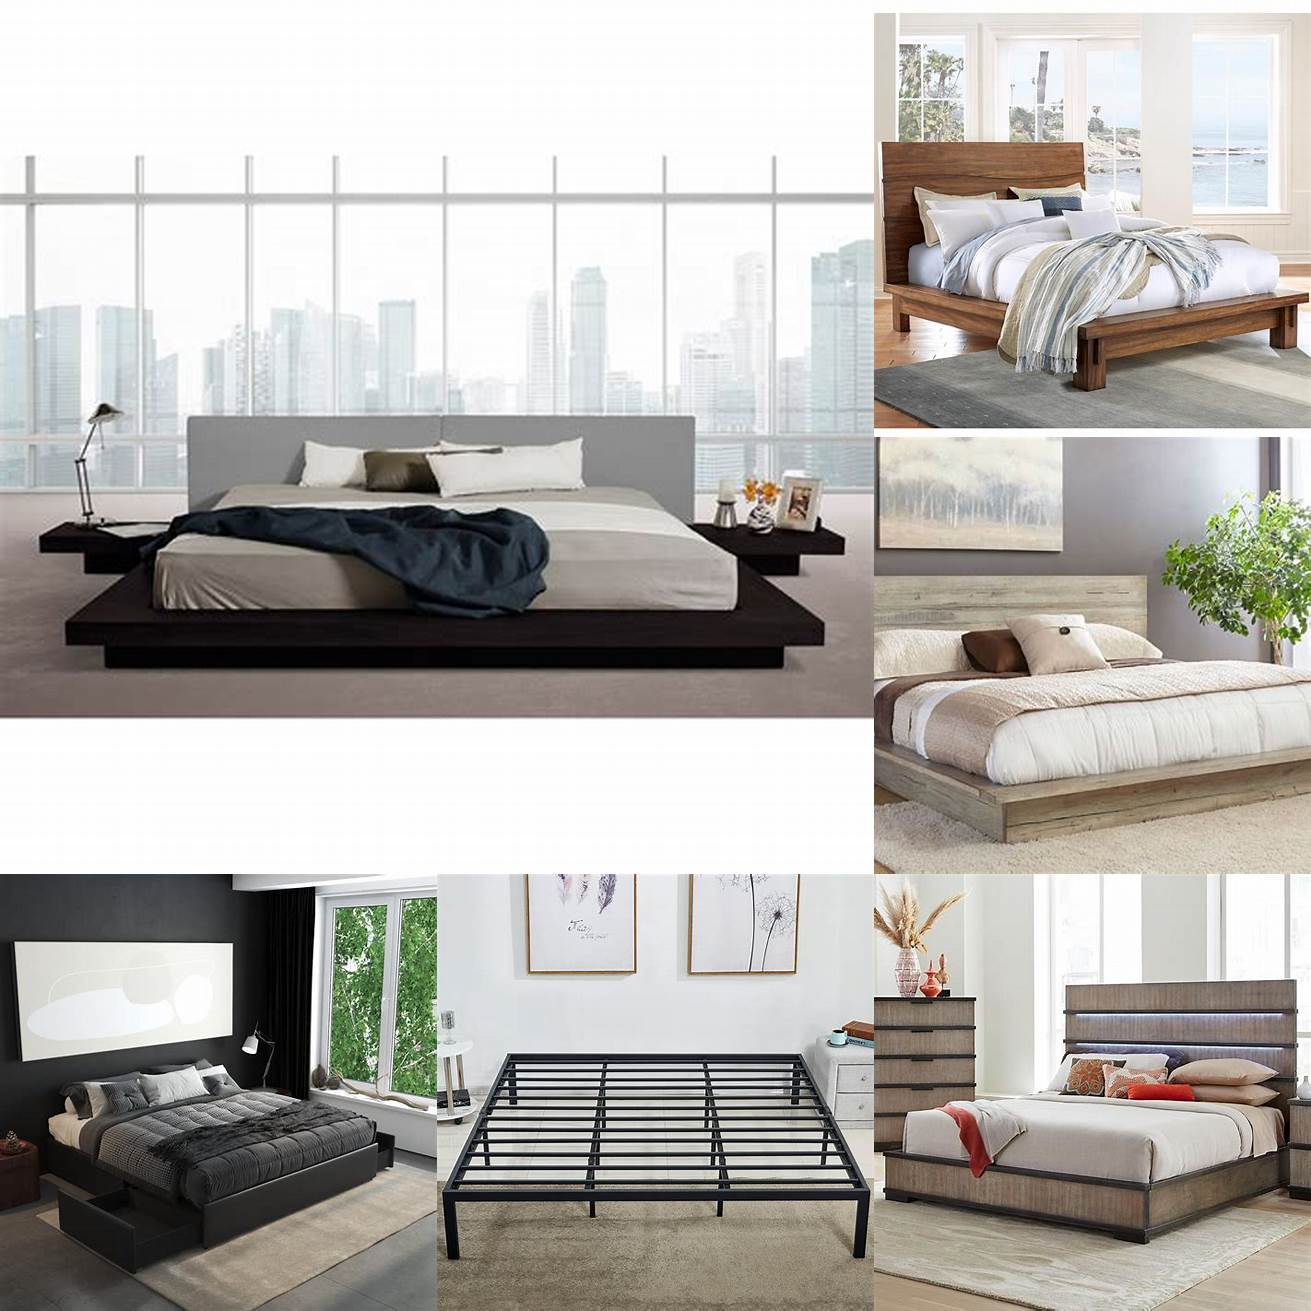 Platform Eastern King Bed - a bed with a low profile frame and no box spring